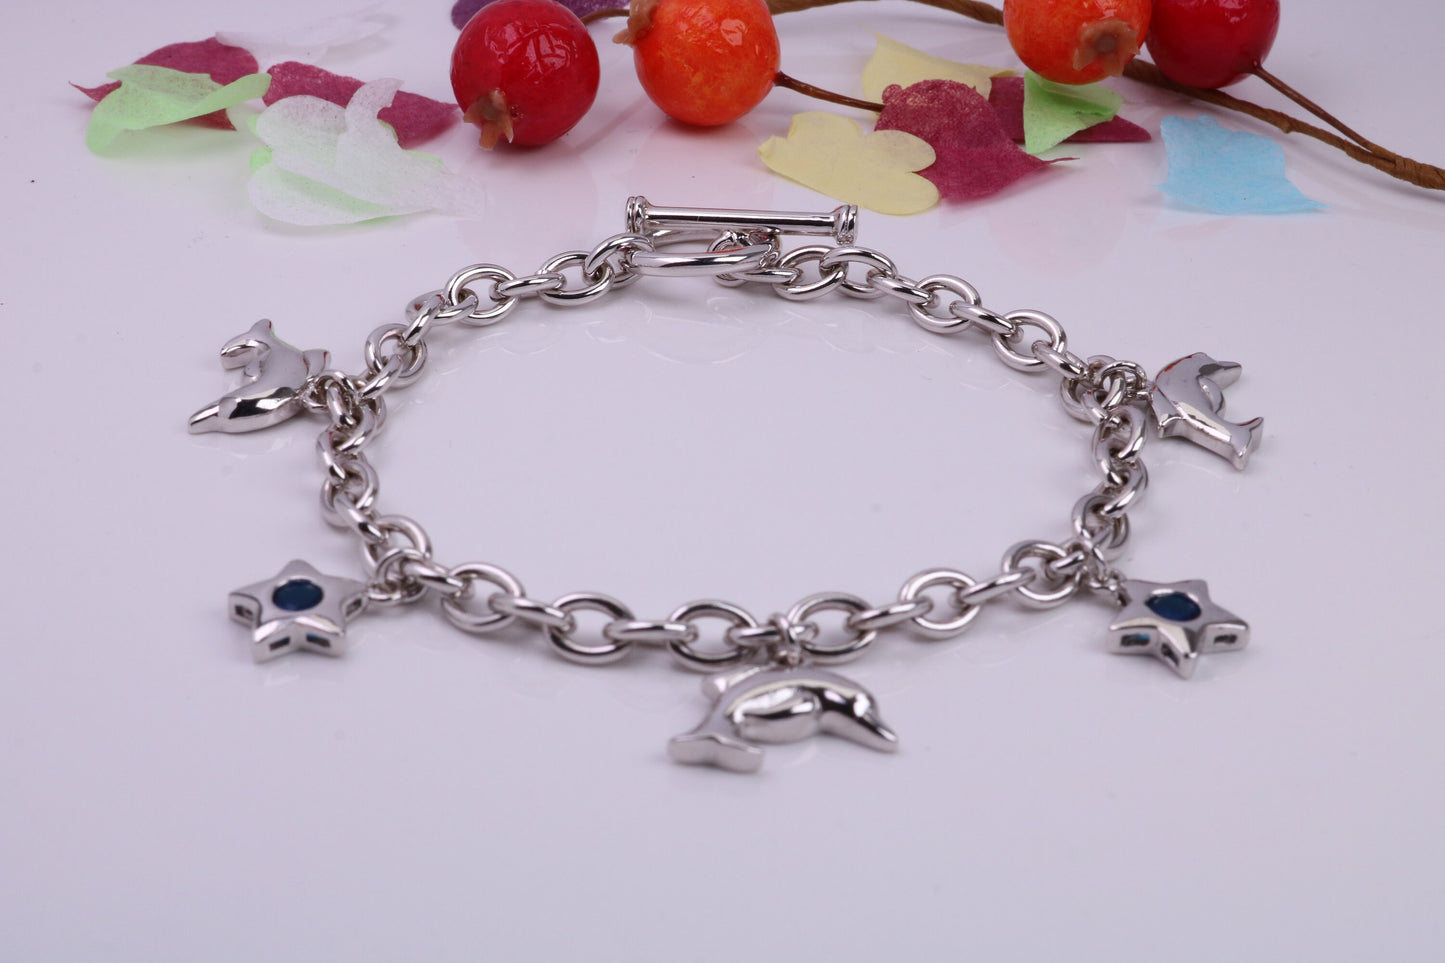 Ready to Wear Charms Bracelet, With Five Charms Attached, Made from solid Sterling Silver, 7.50 Inches Long, Good Weighty Feel